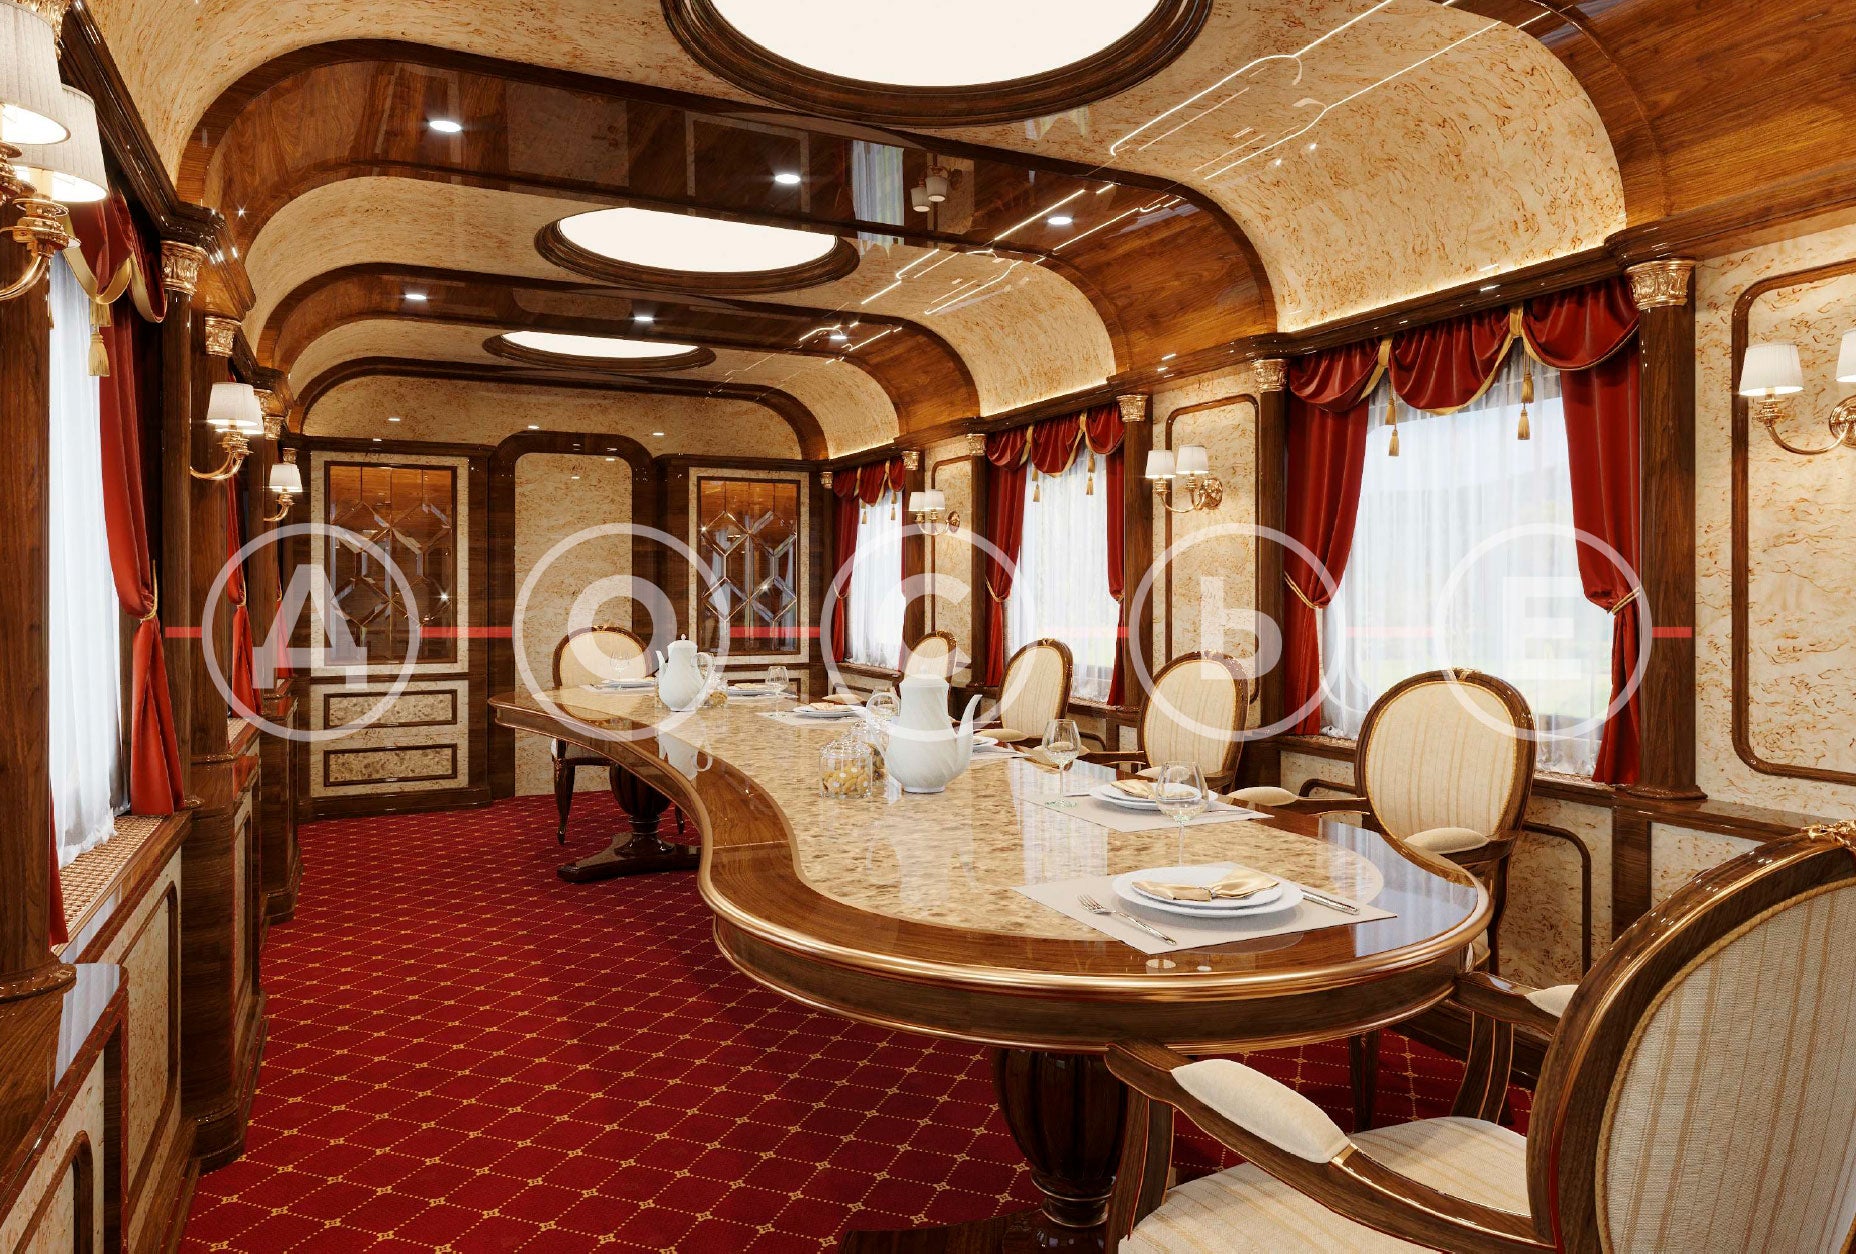 The dining car can be seen furnished with plush red carpet, curtains and a long, art deco-style table